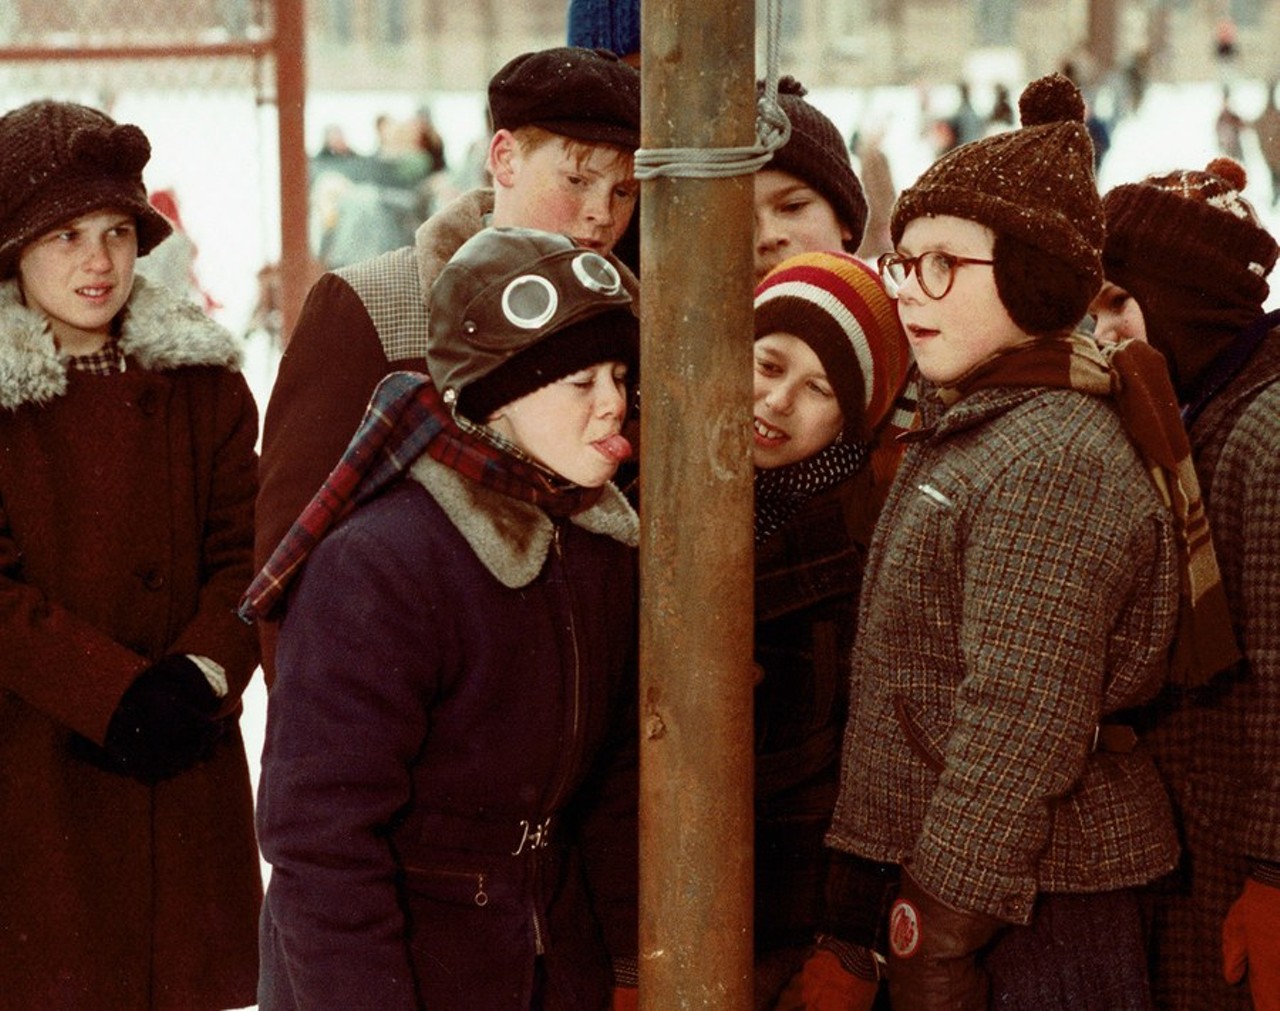 St. Petersburg Holiday Movies in the Park presents A Christmas Story
Dec. 7: 7 p.m.
Production still